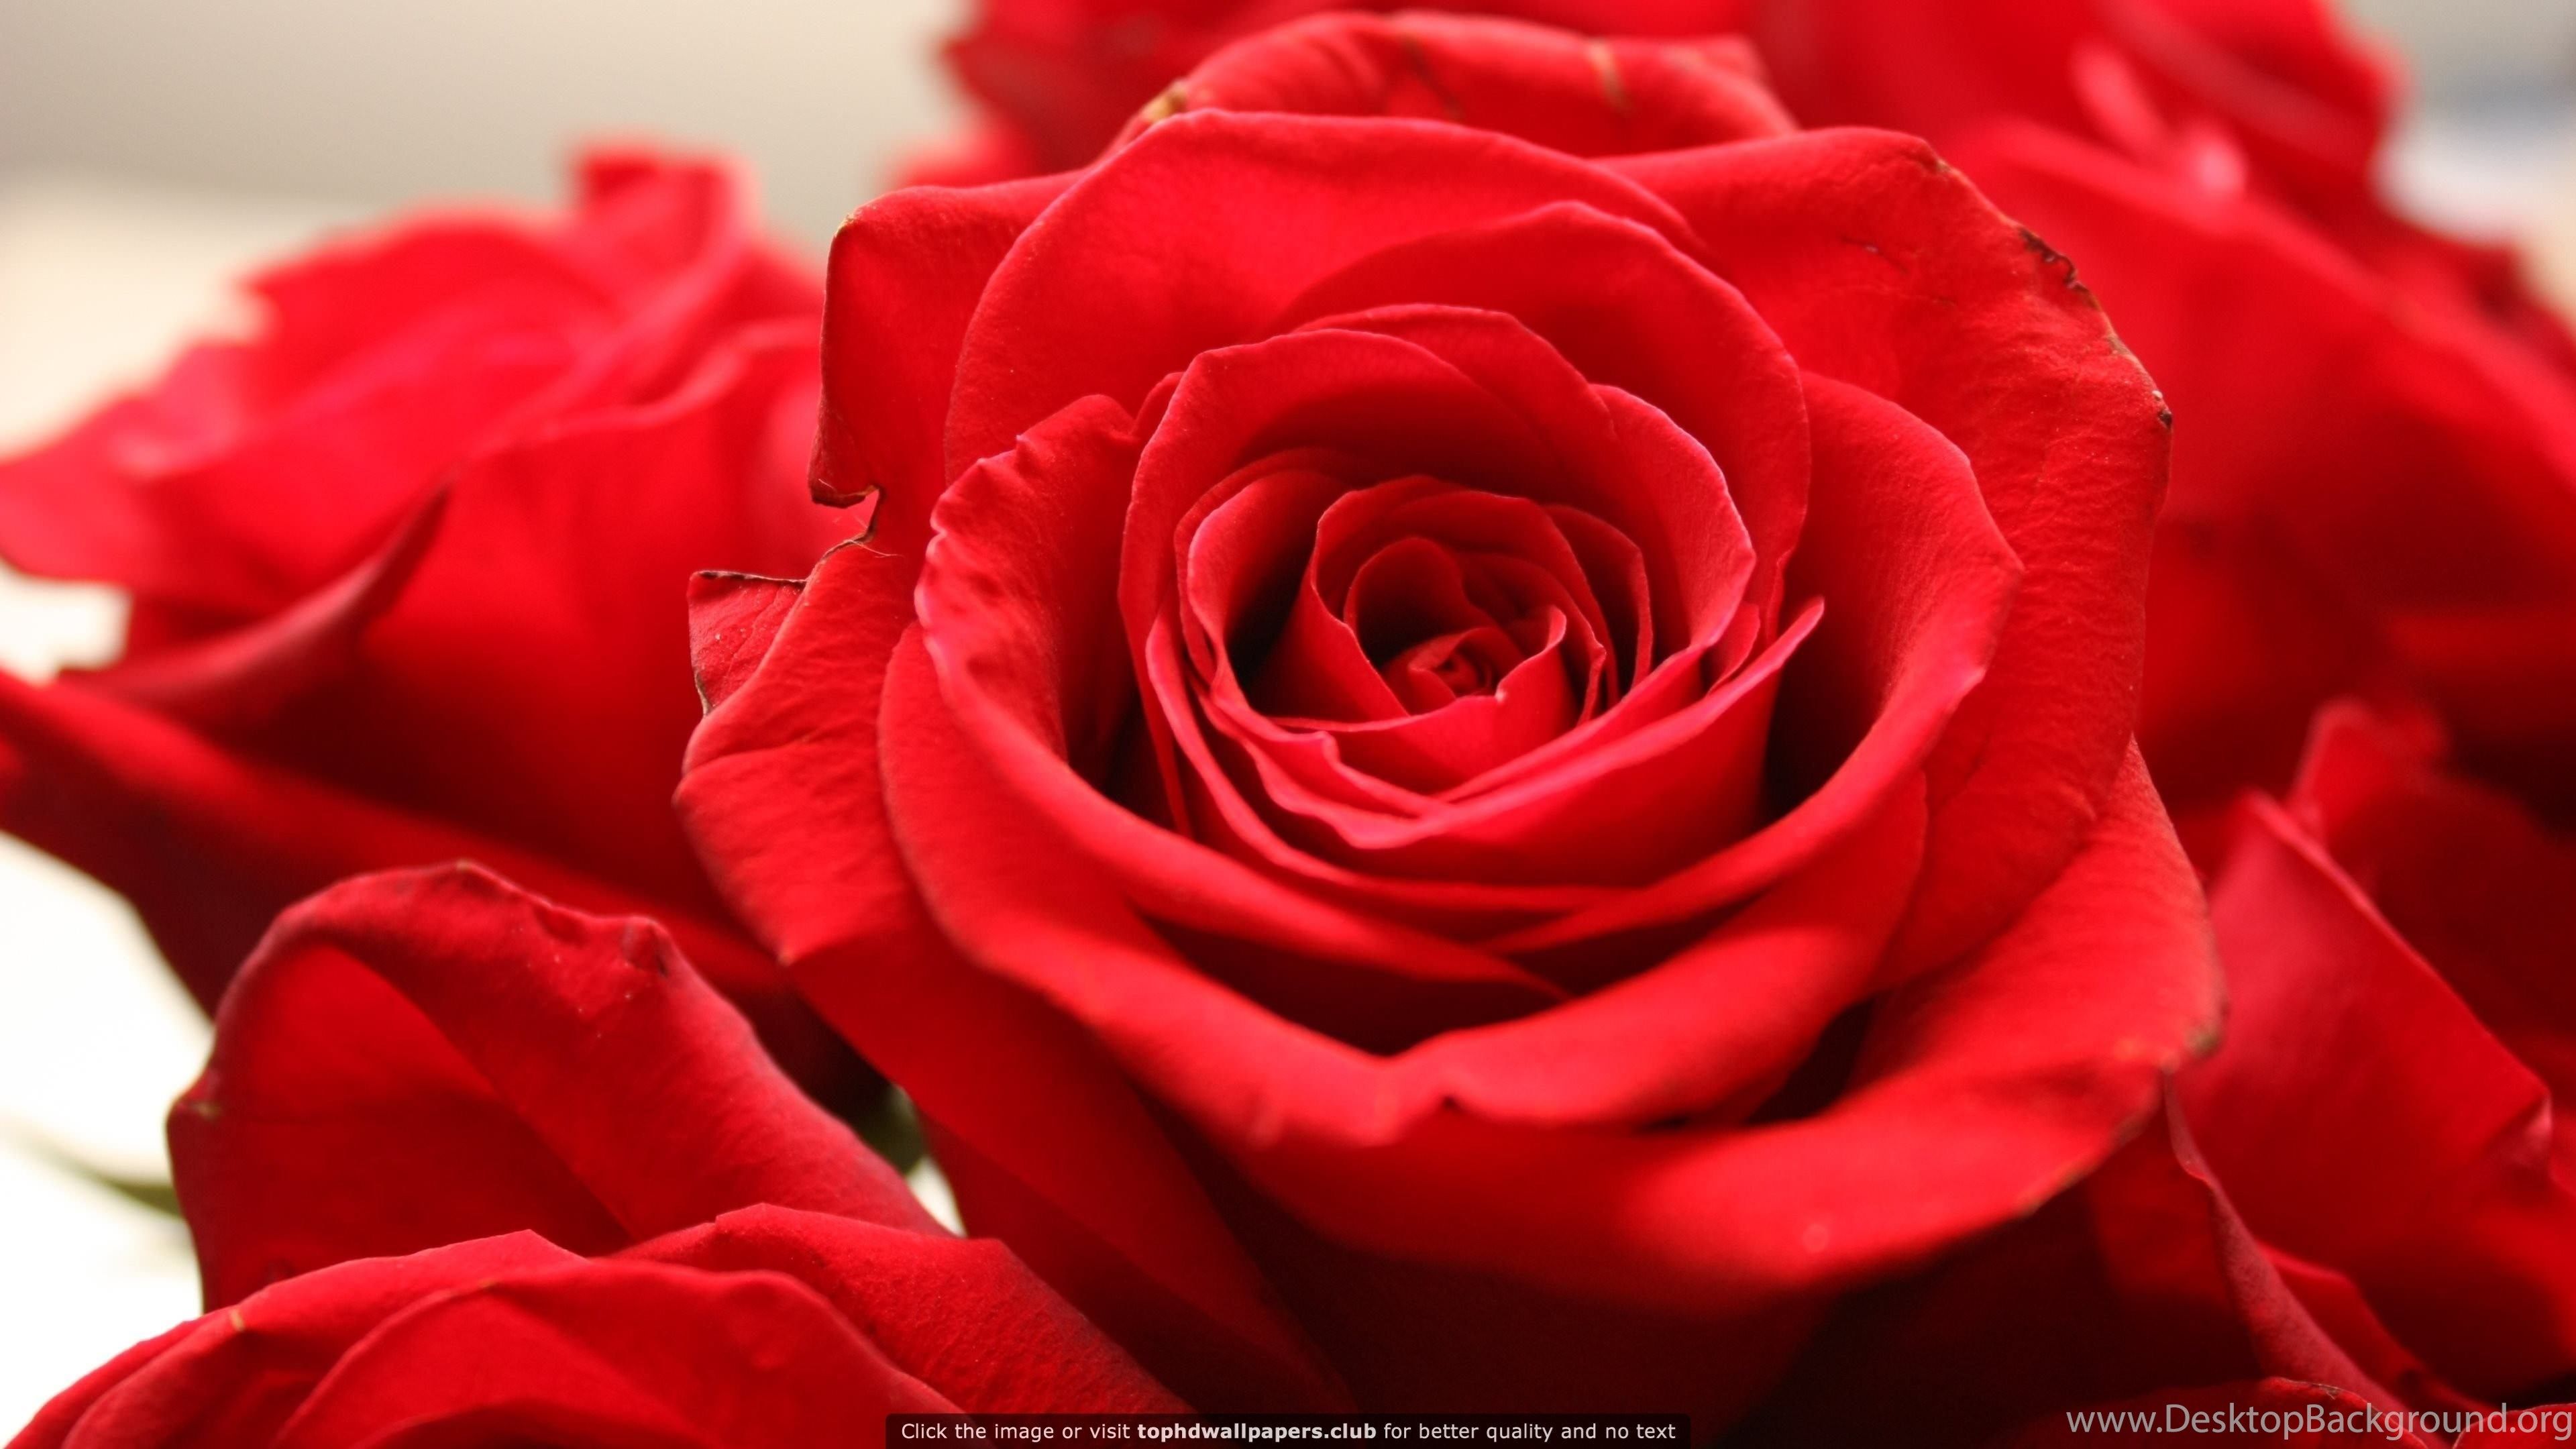 Red Rose 4K Or HD Wallpaper For Your PC, Mac Or Mobile Device Desktop Background